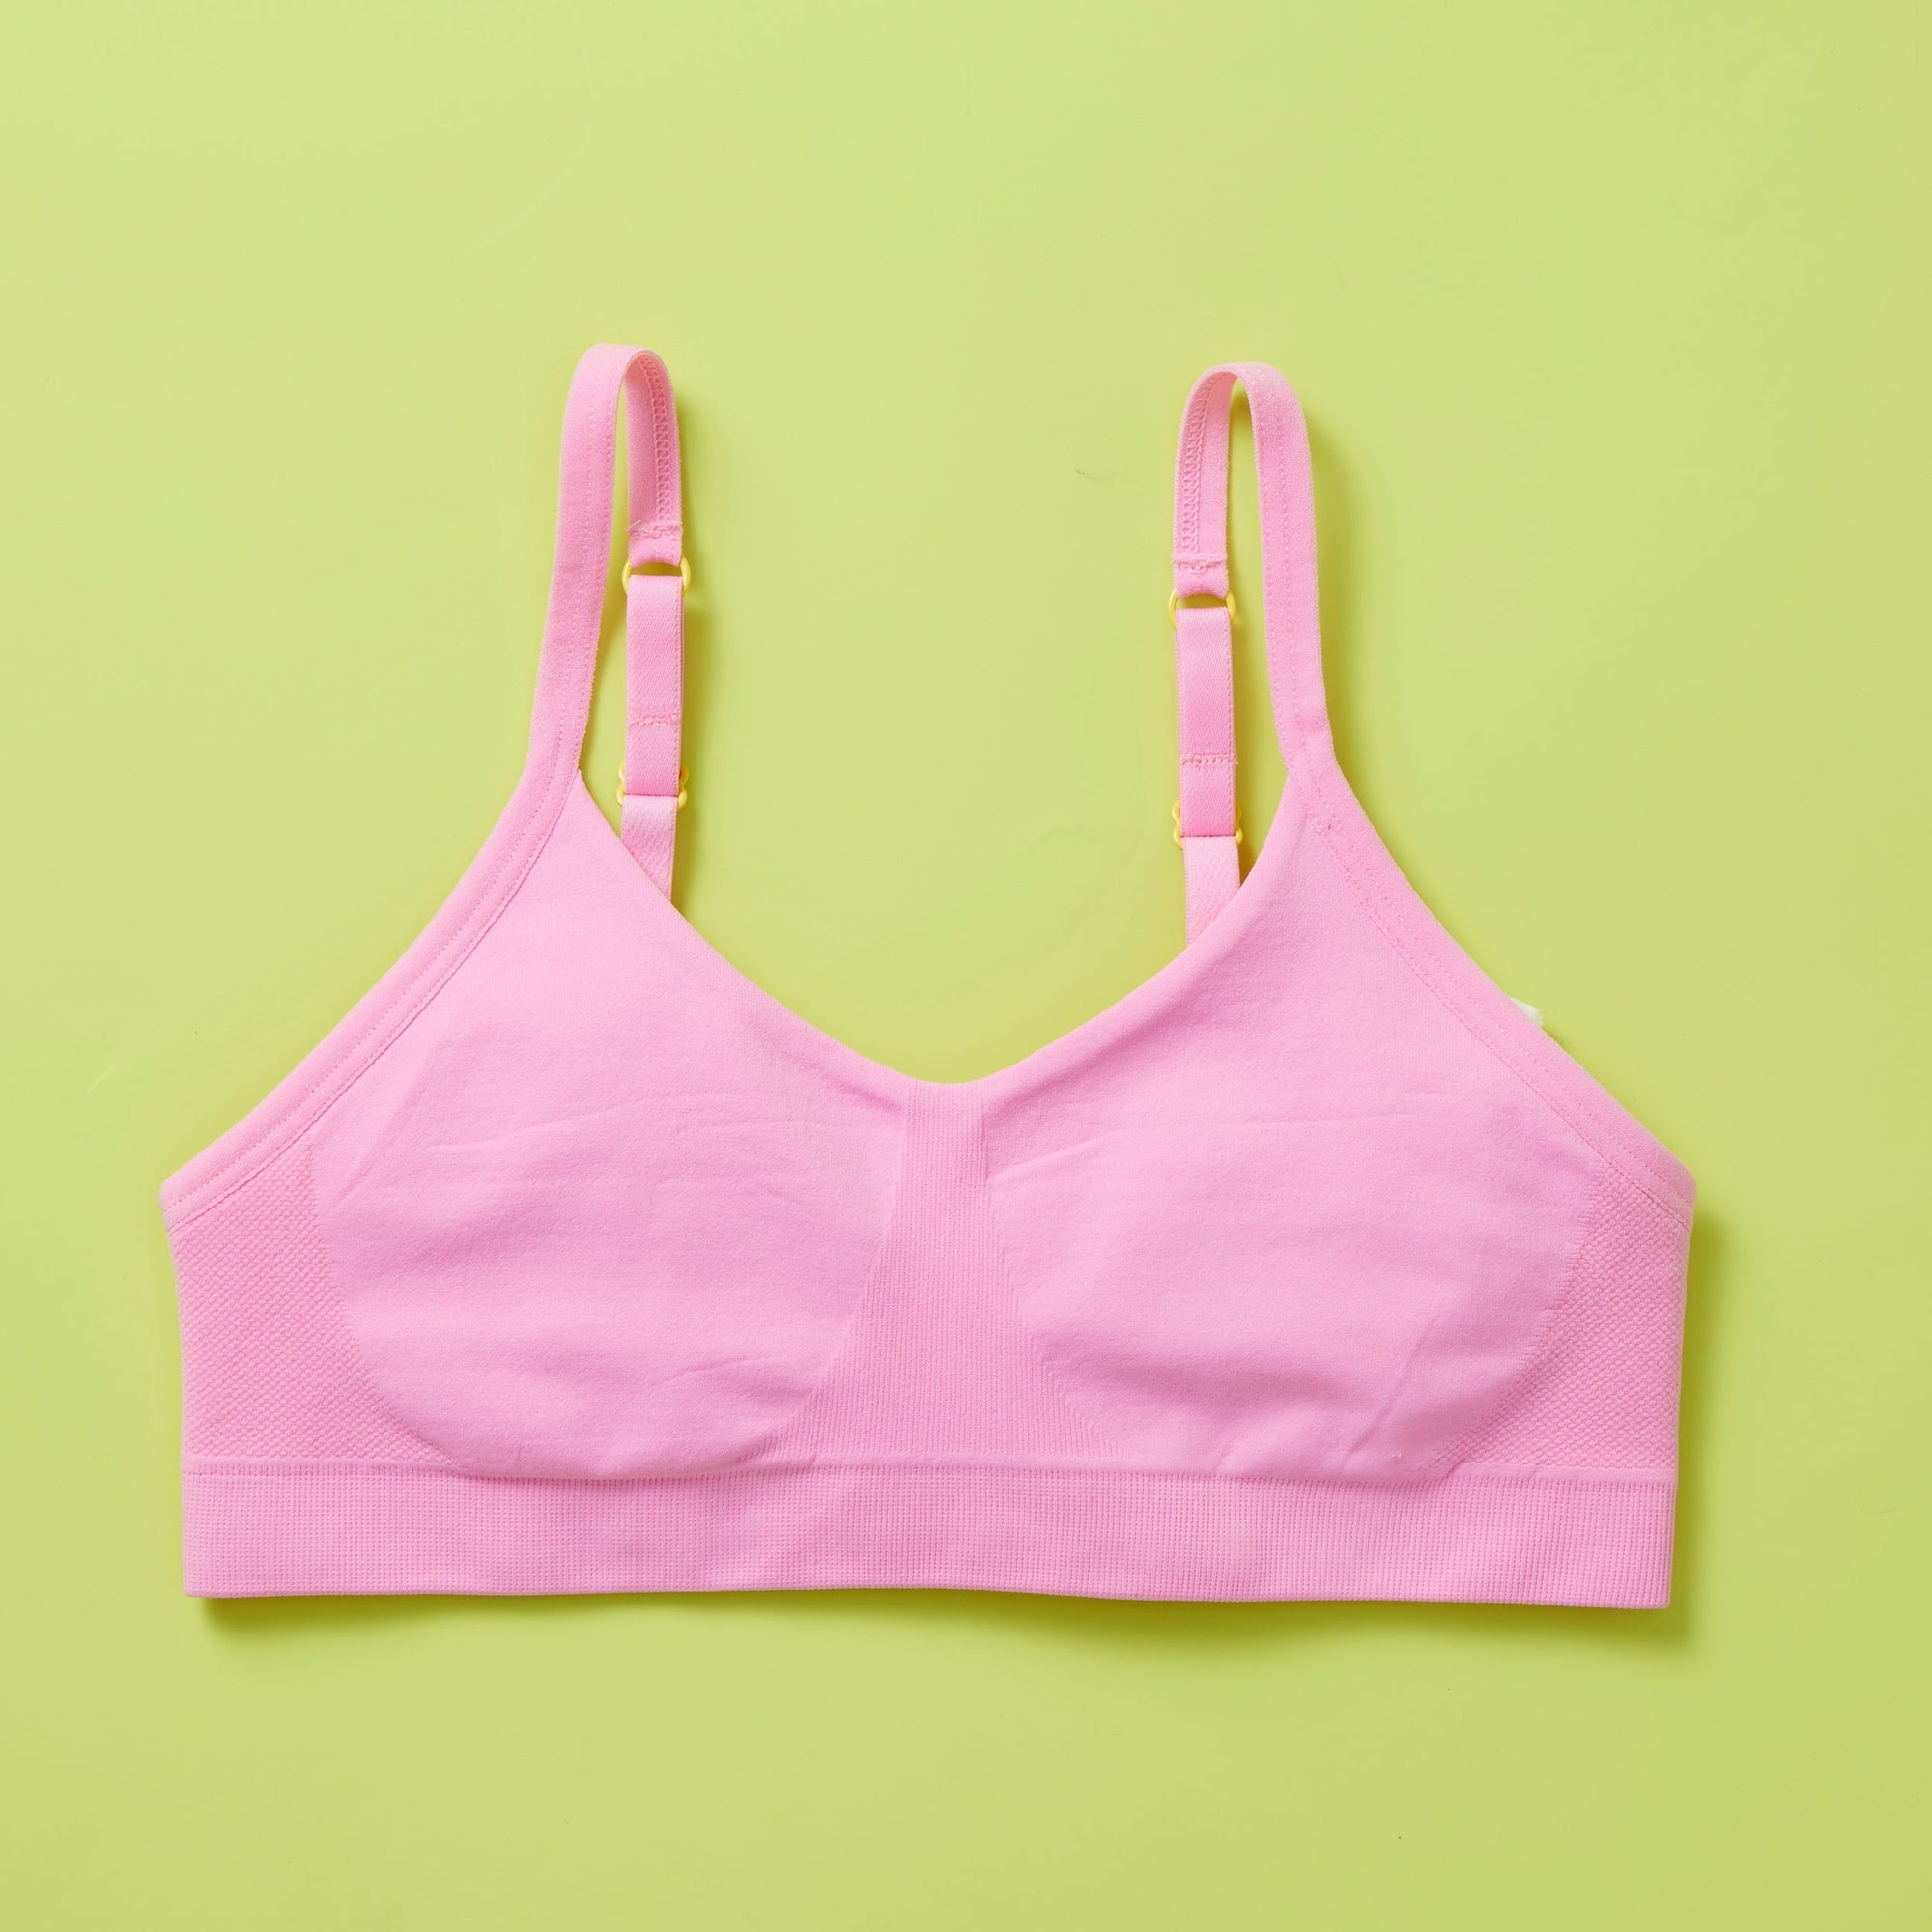 Tween Bras - Yellowberry Bras for Tweens and Girls. Best bra for girls  Tagged seamless